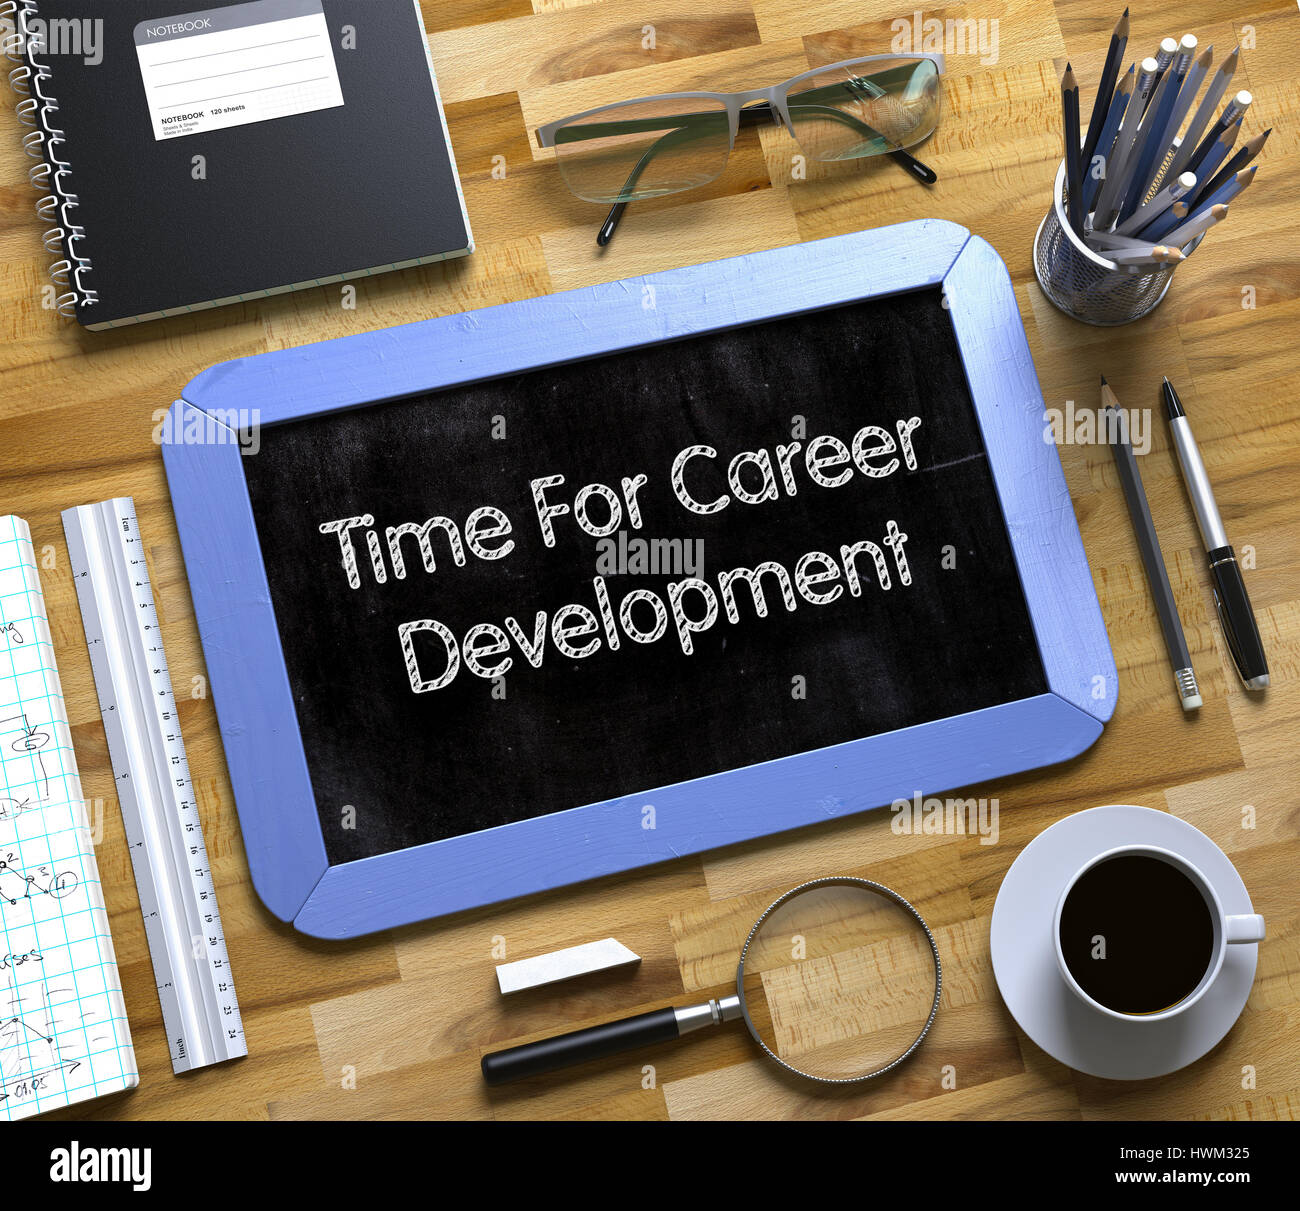 Time For Career Development Concept on Small Chalkboard. 3d. Stock Photo